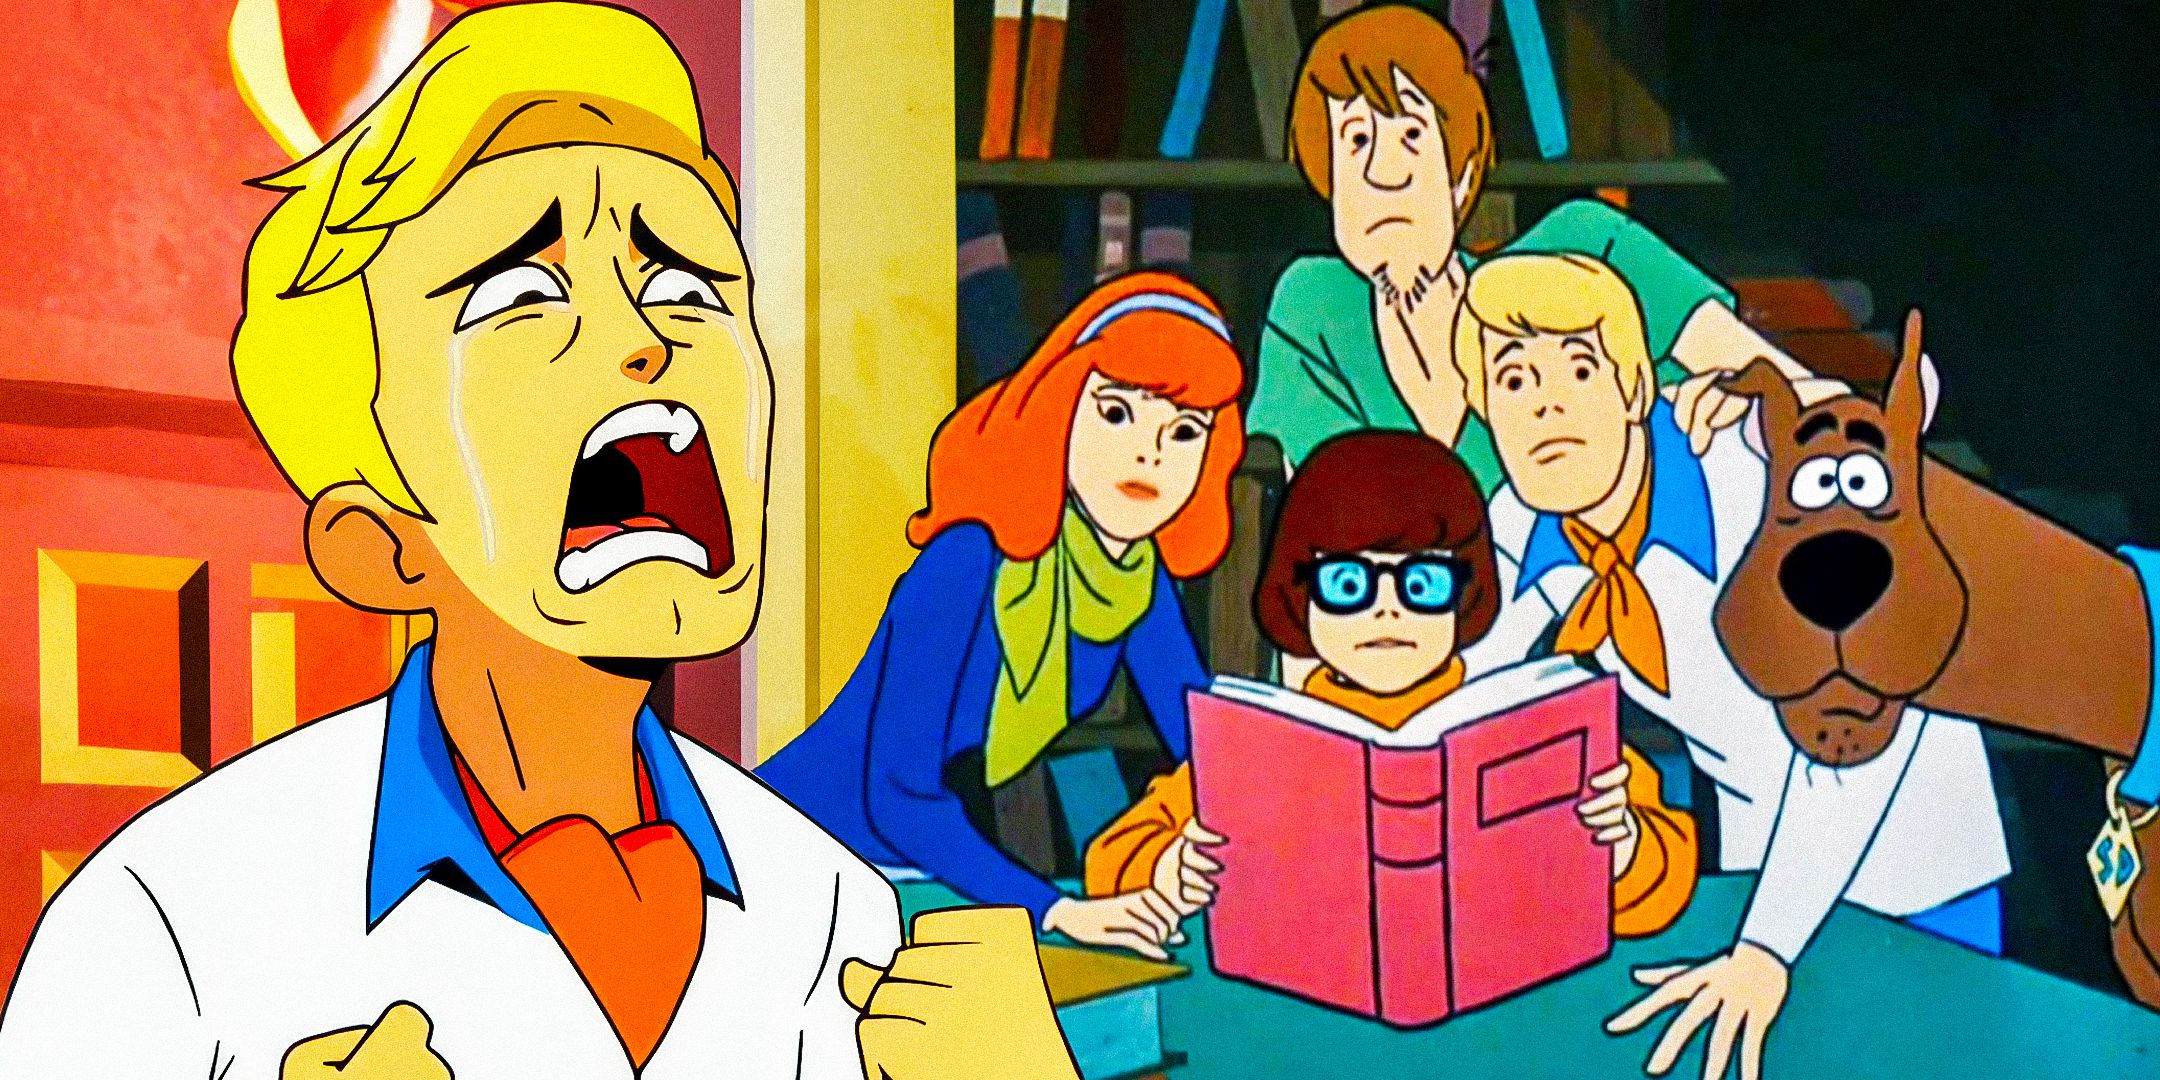 Fred crying in Velma and the Scooby-Doo cast, including Daphne, Velma, Shaggy, Fred, and Scooby-Doo.